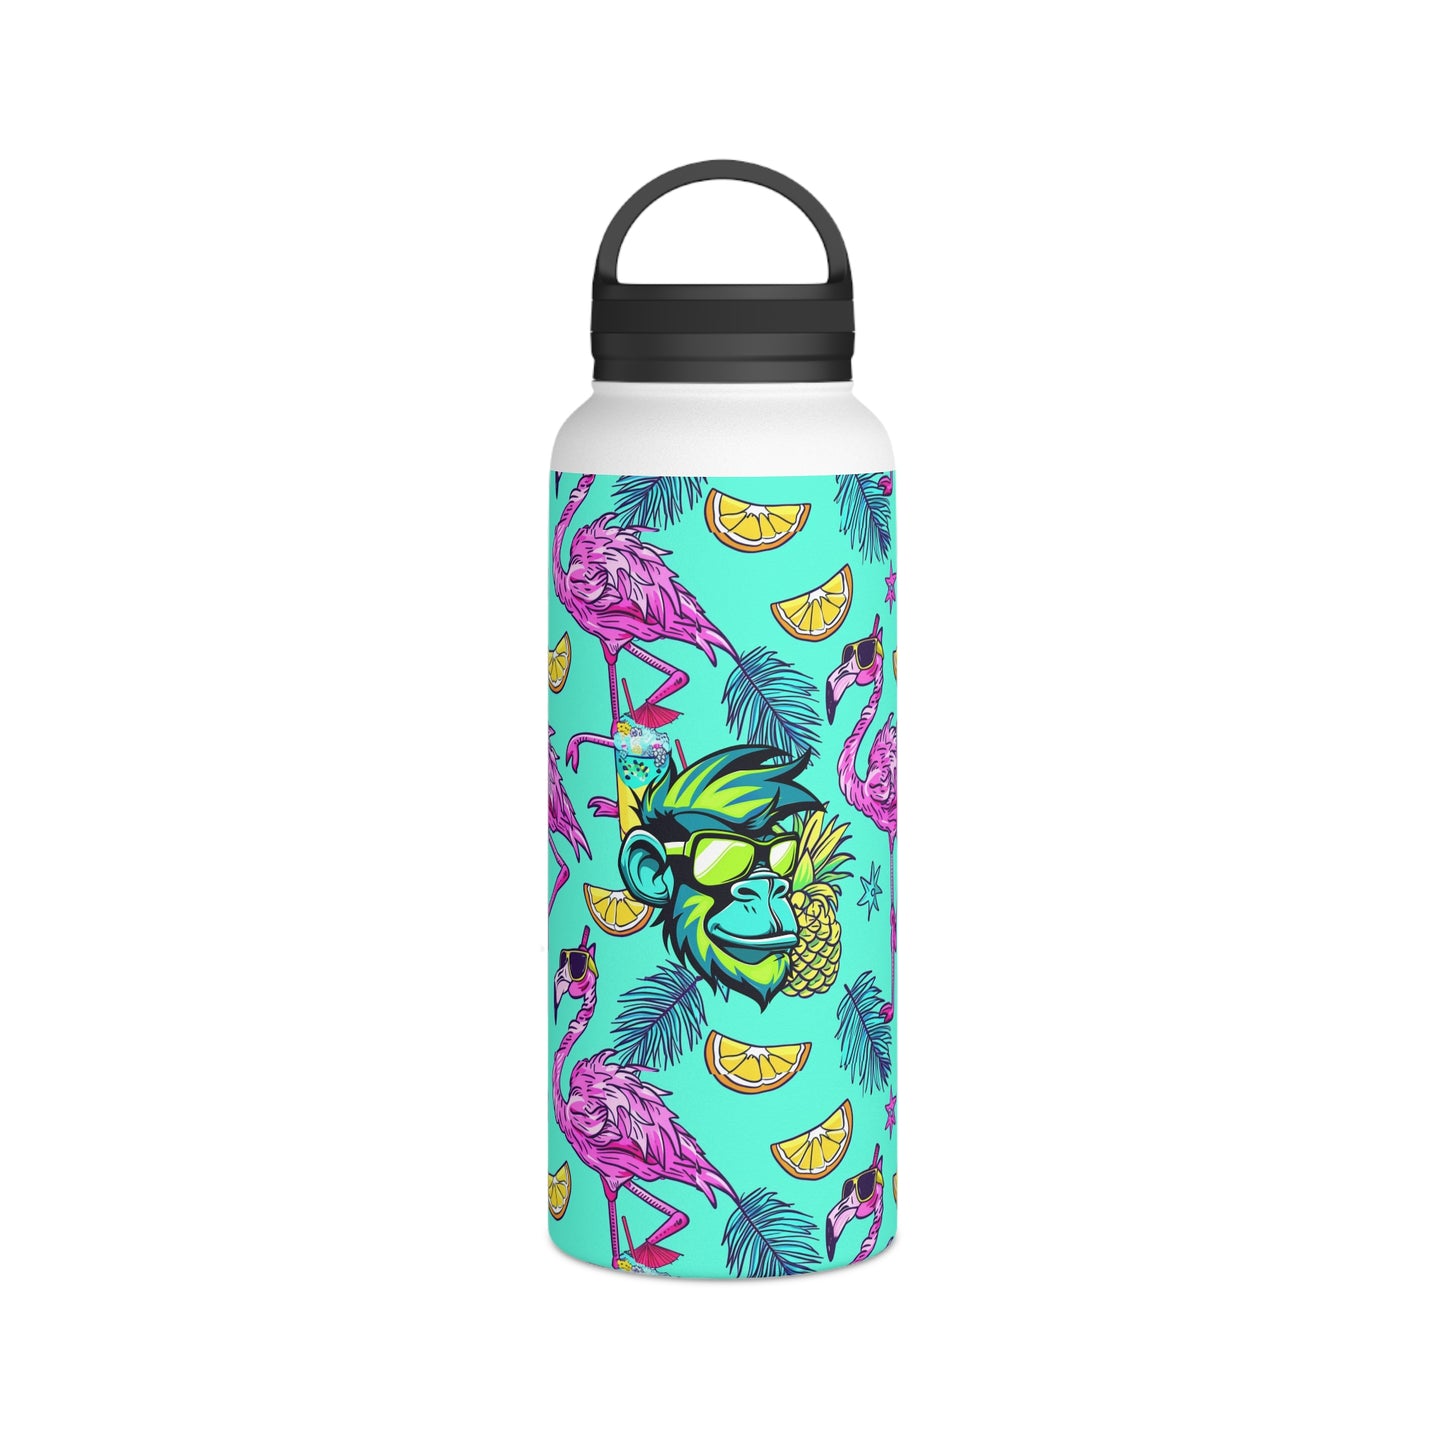 Flamingo Party Mascot Surface Beach Volleyball Club Stainless Steel Water Bottle, Handle Lid